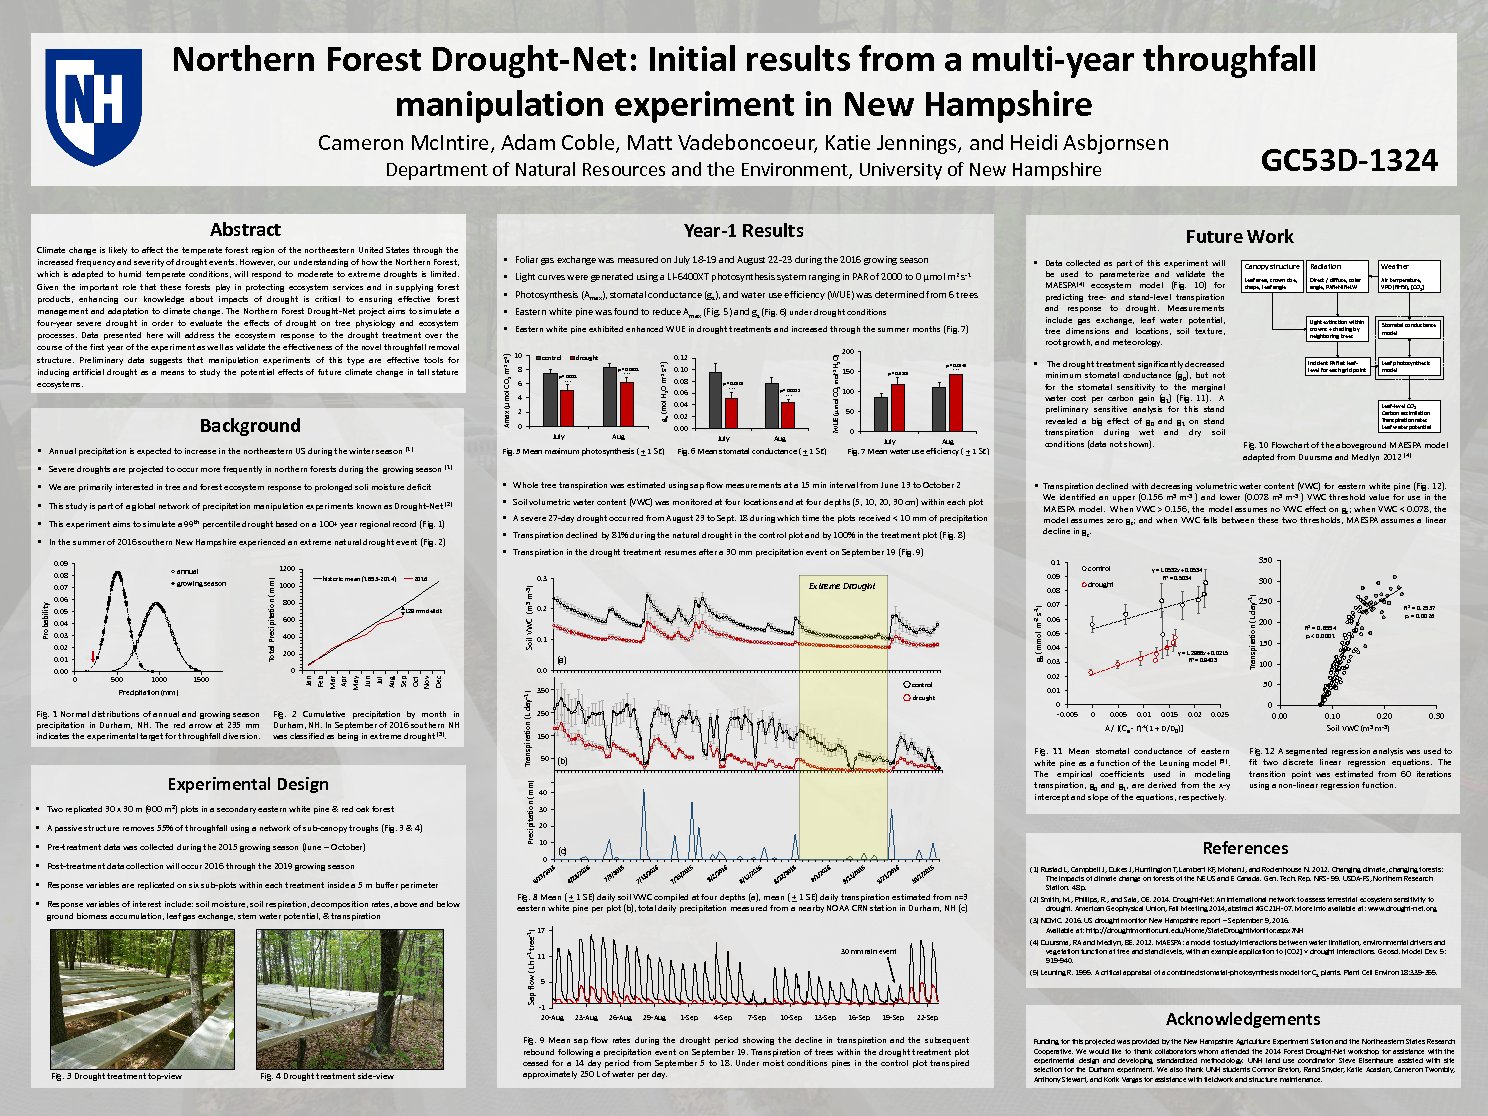 Northern Forest Drought-Net: Initial Results From A Multi-Year Throughfall Manipulation Experiment In New Hampshire by cm11